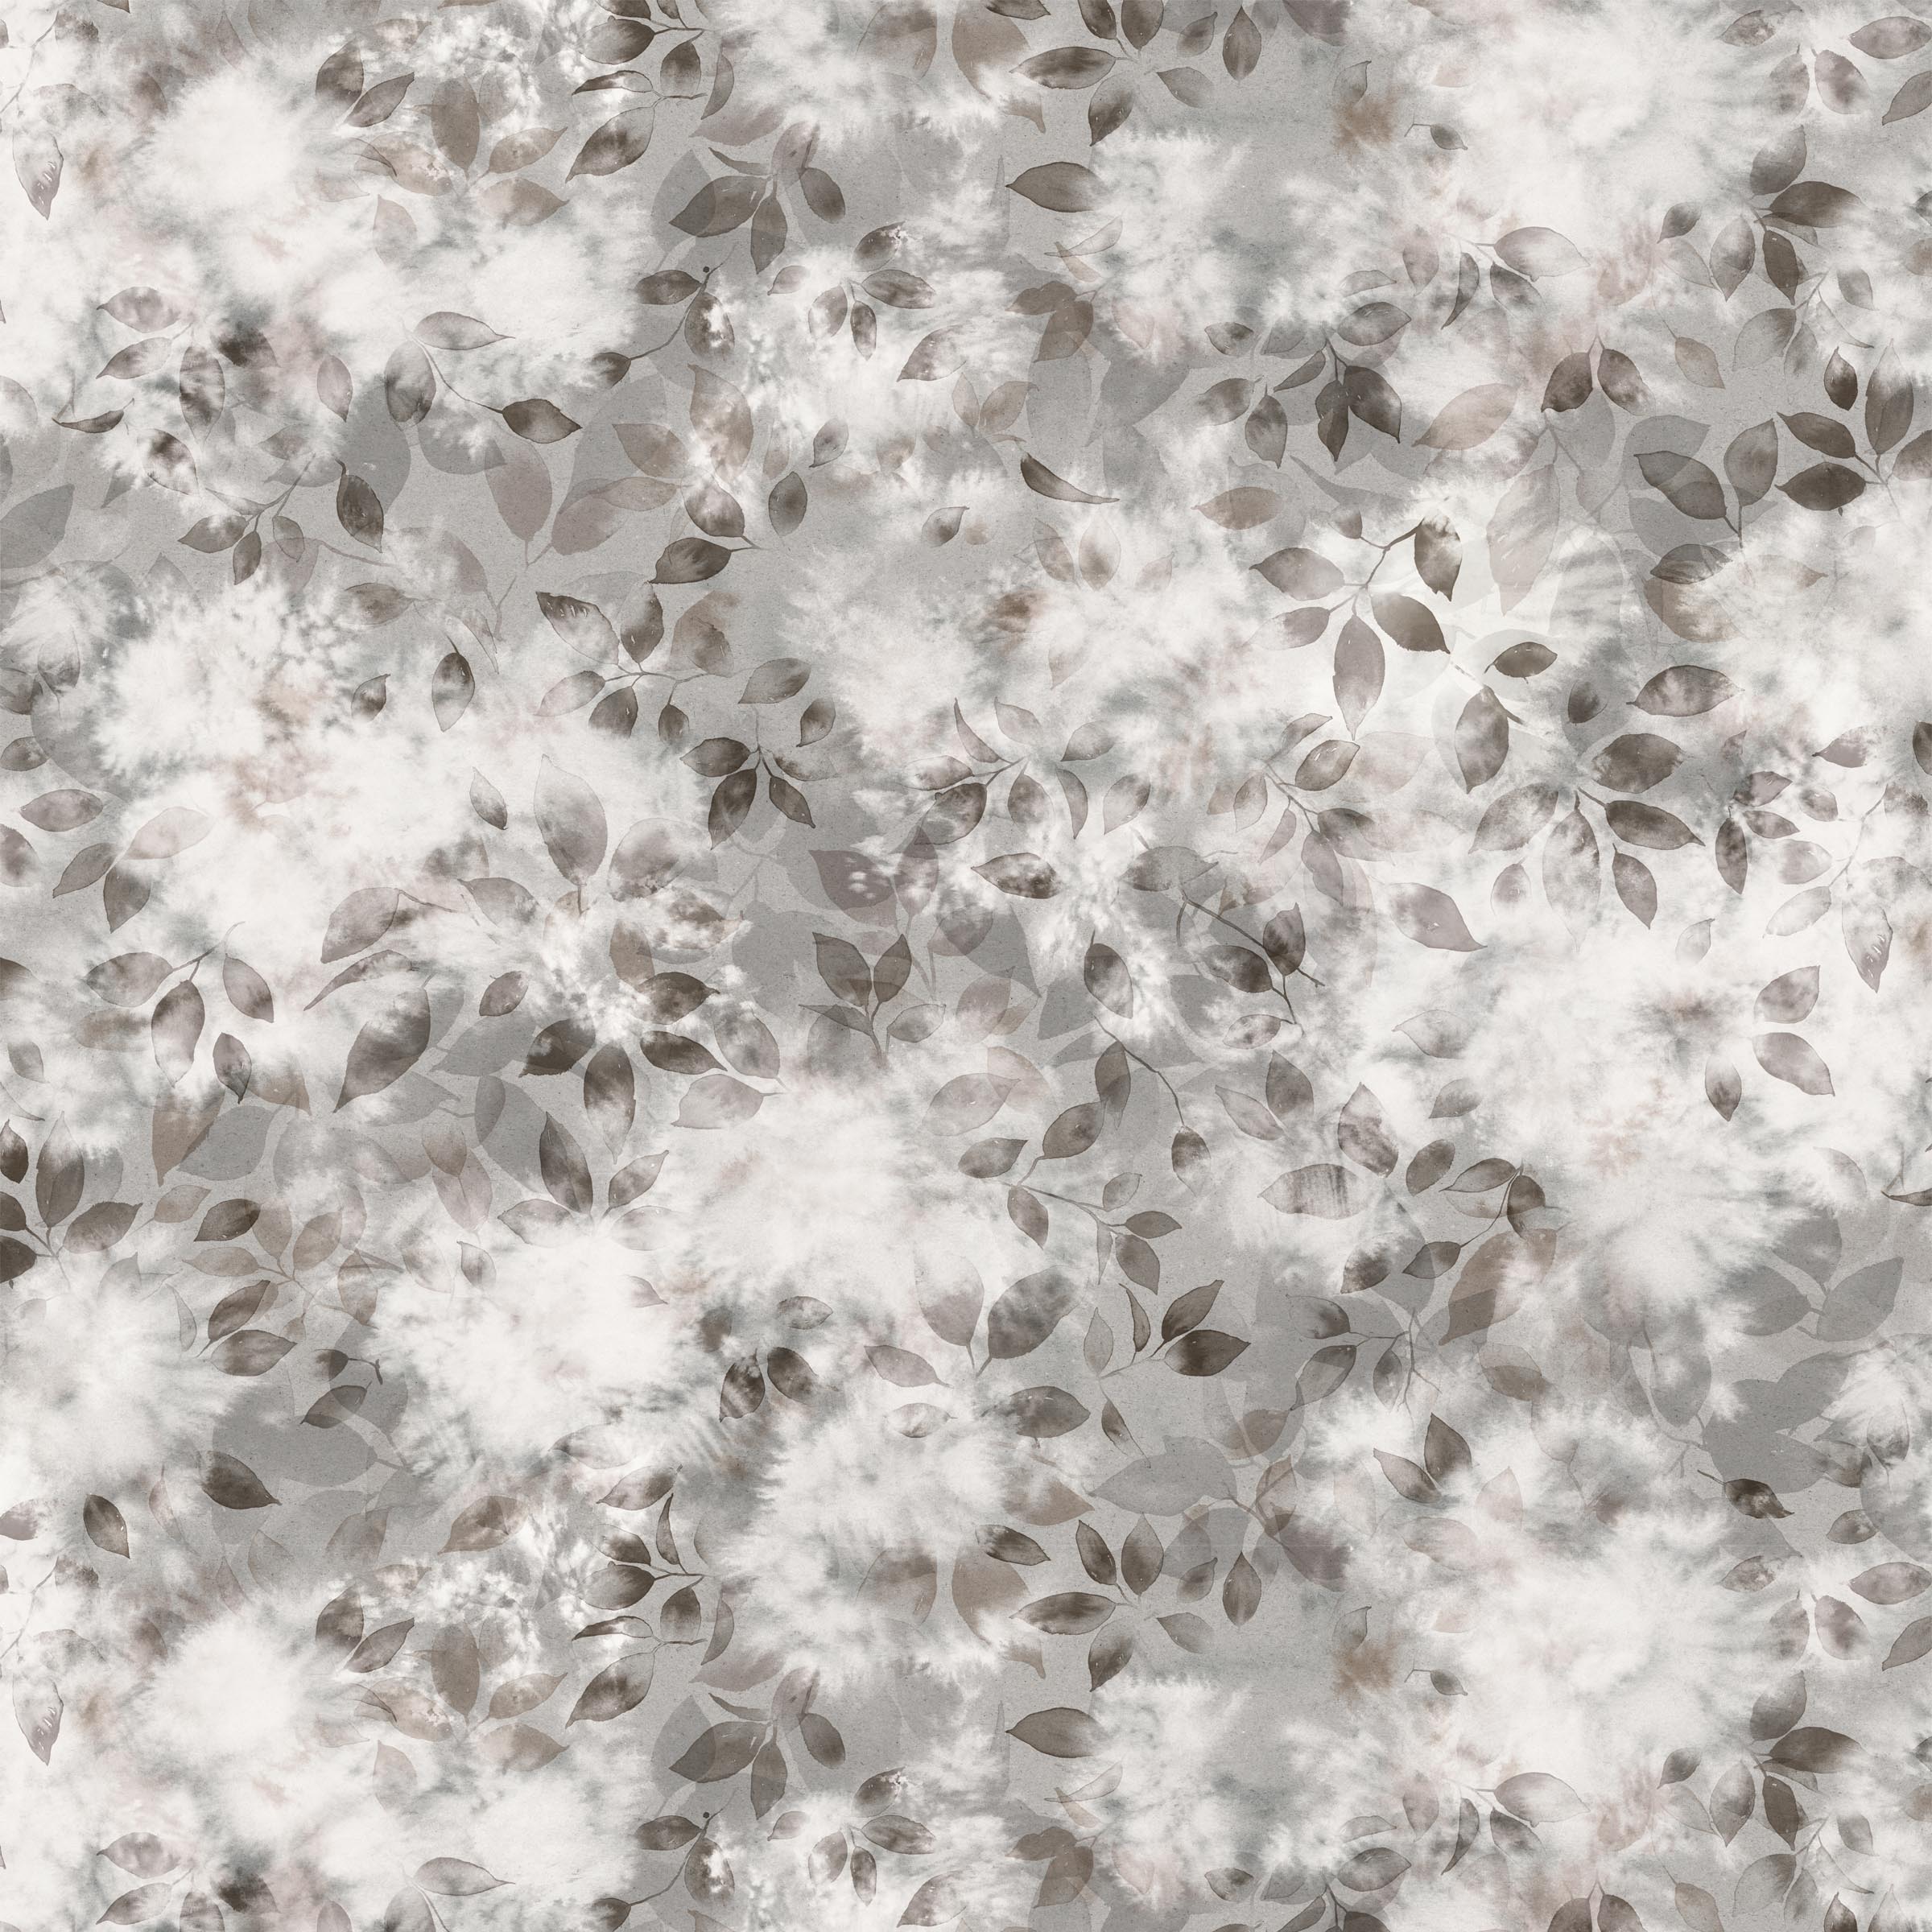 Detail of wallpaper in a painterly leaf print in shades of brown and gray with a mottled white overlay.